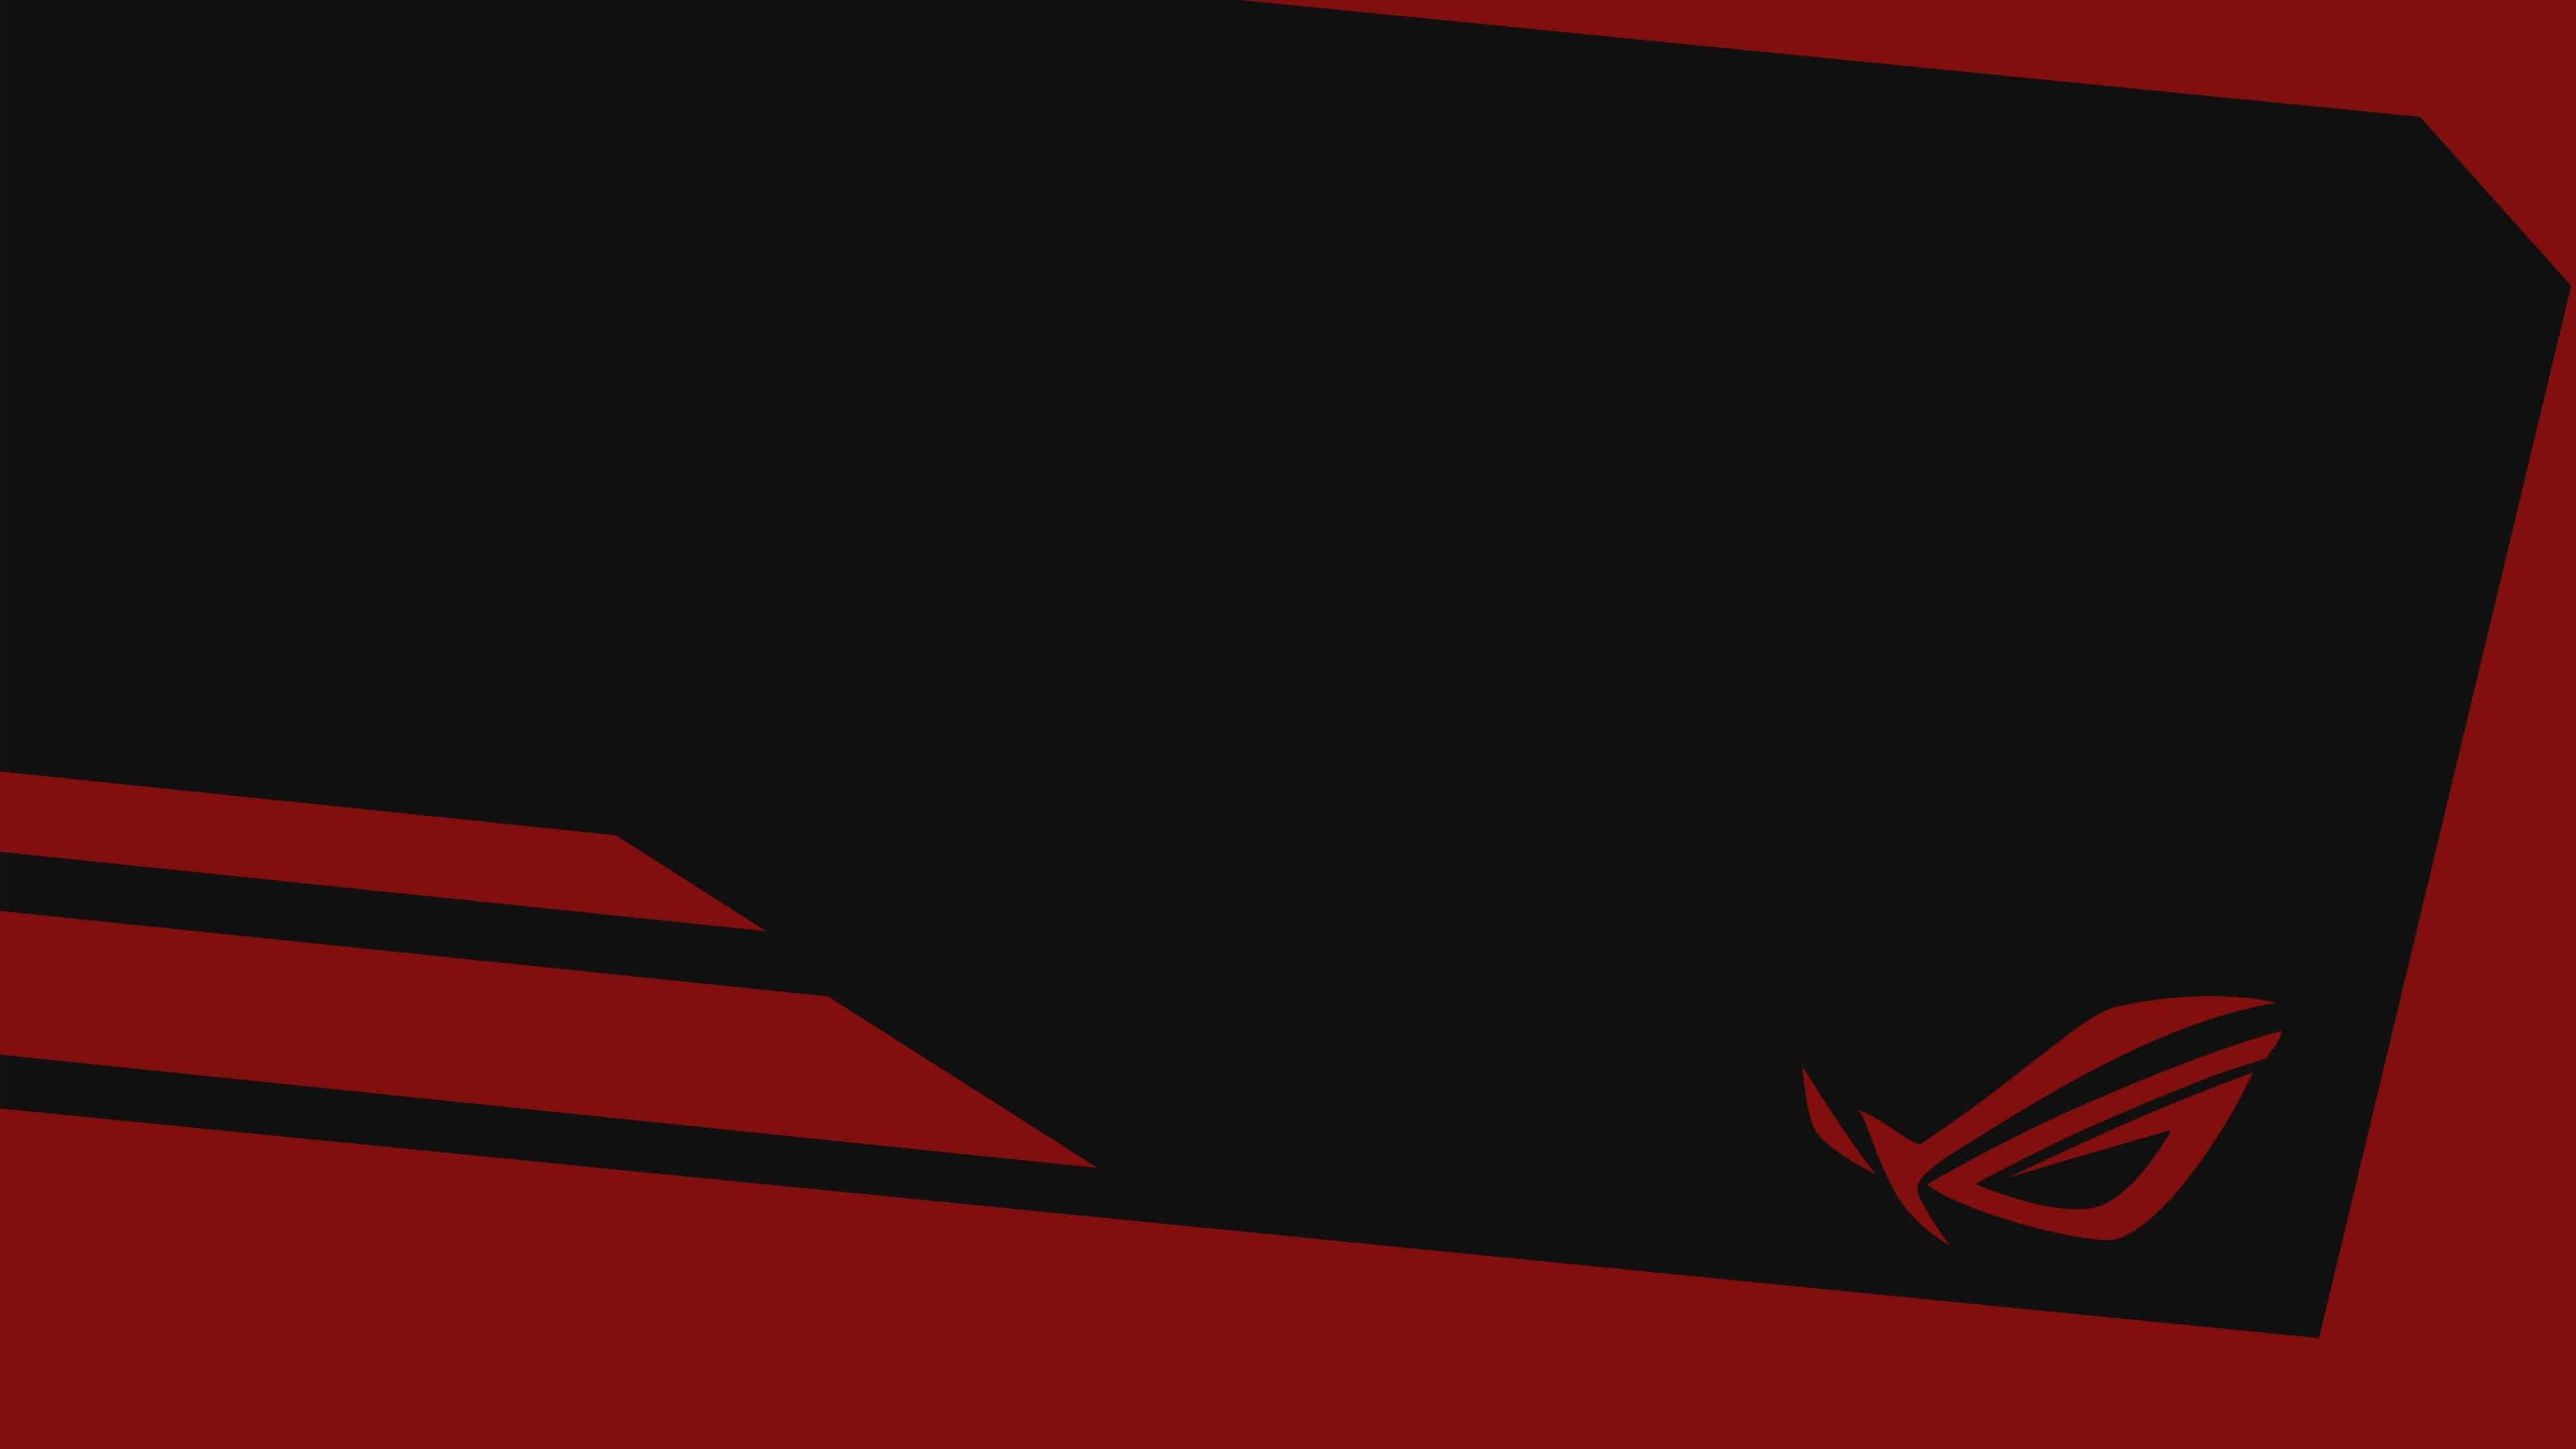 Asus Red Rog Background